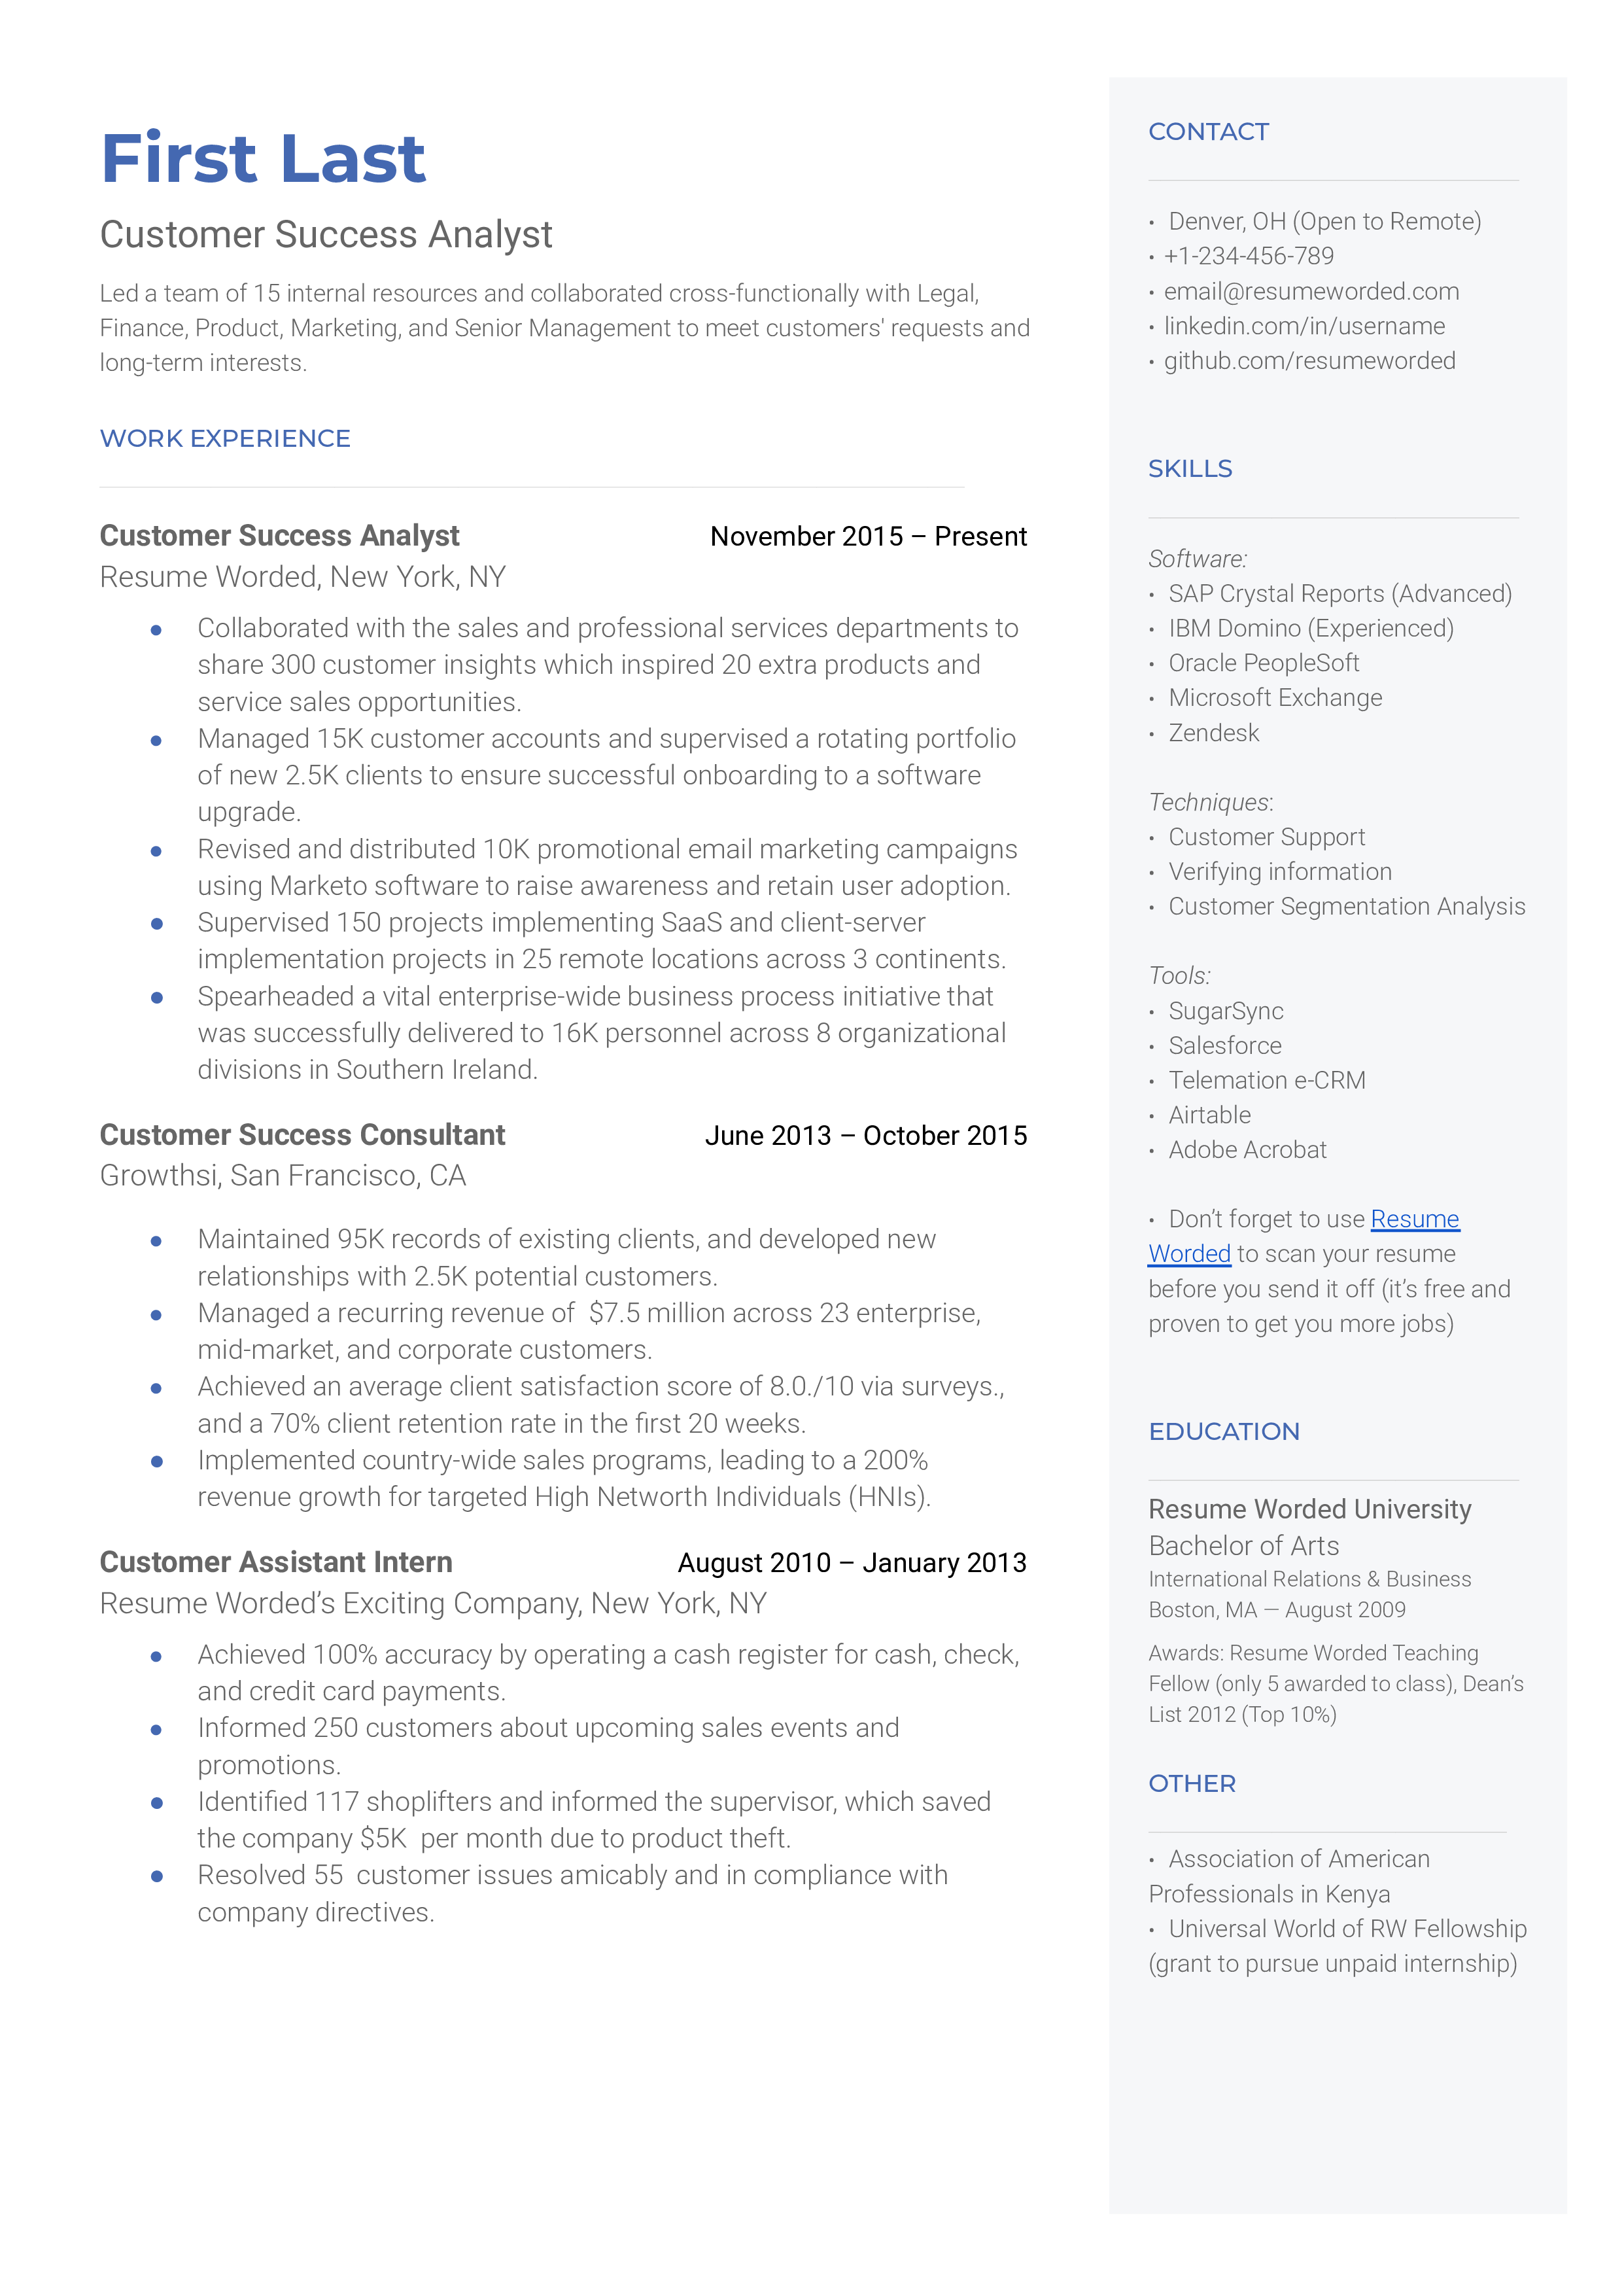 A Customer Success Analyst resume showing the use of industry-specific action verbs to demonstrate experience